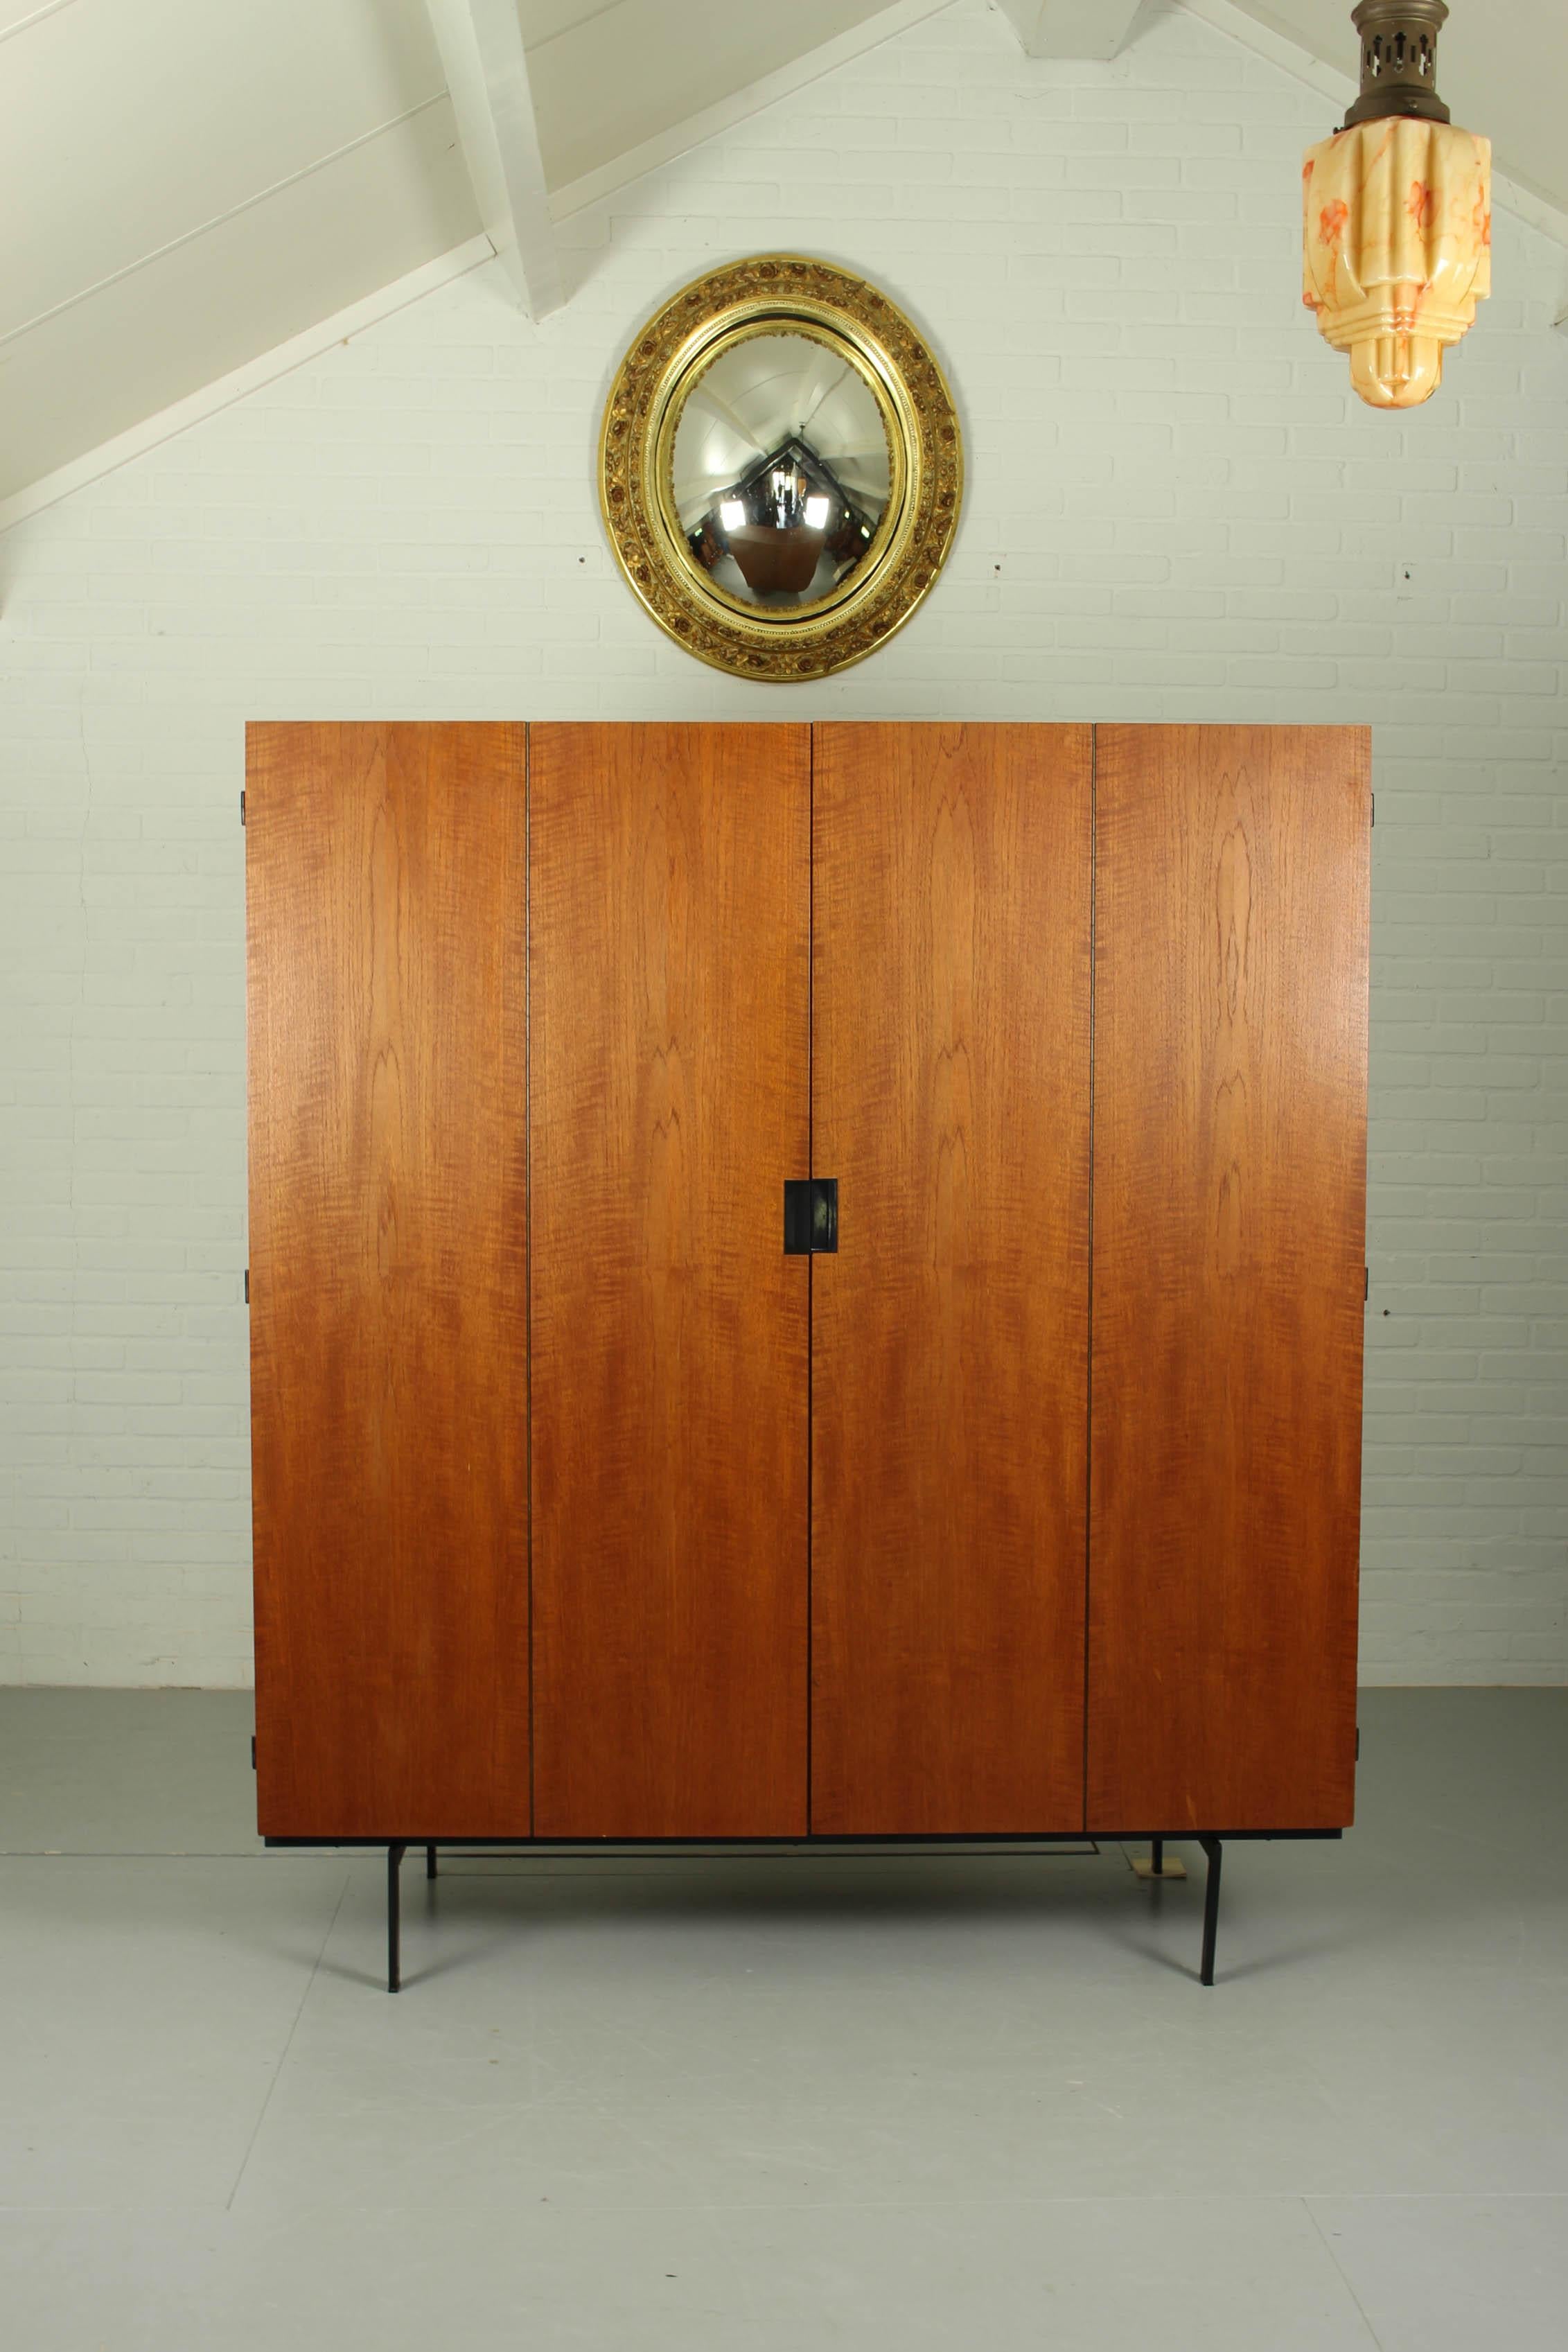 Wardrobe KU14 Cees Braakman Pastoe Japanese series 60s. It has two doors in teak with an additional folding mechanism, revealing four storage spaces. Iconic square black metal handles make it a piece o the very recognizable Japanese series.
 